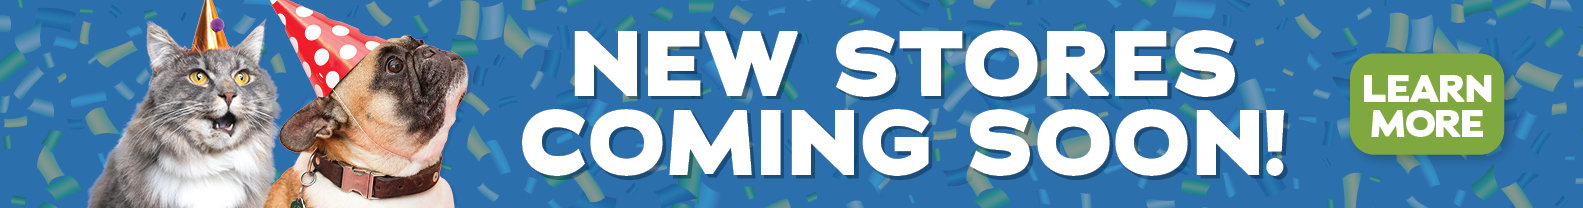 New Stores Coming Soon!